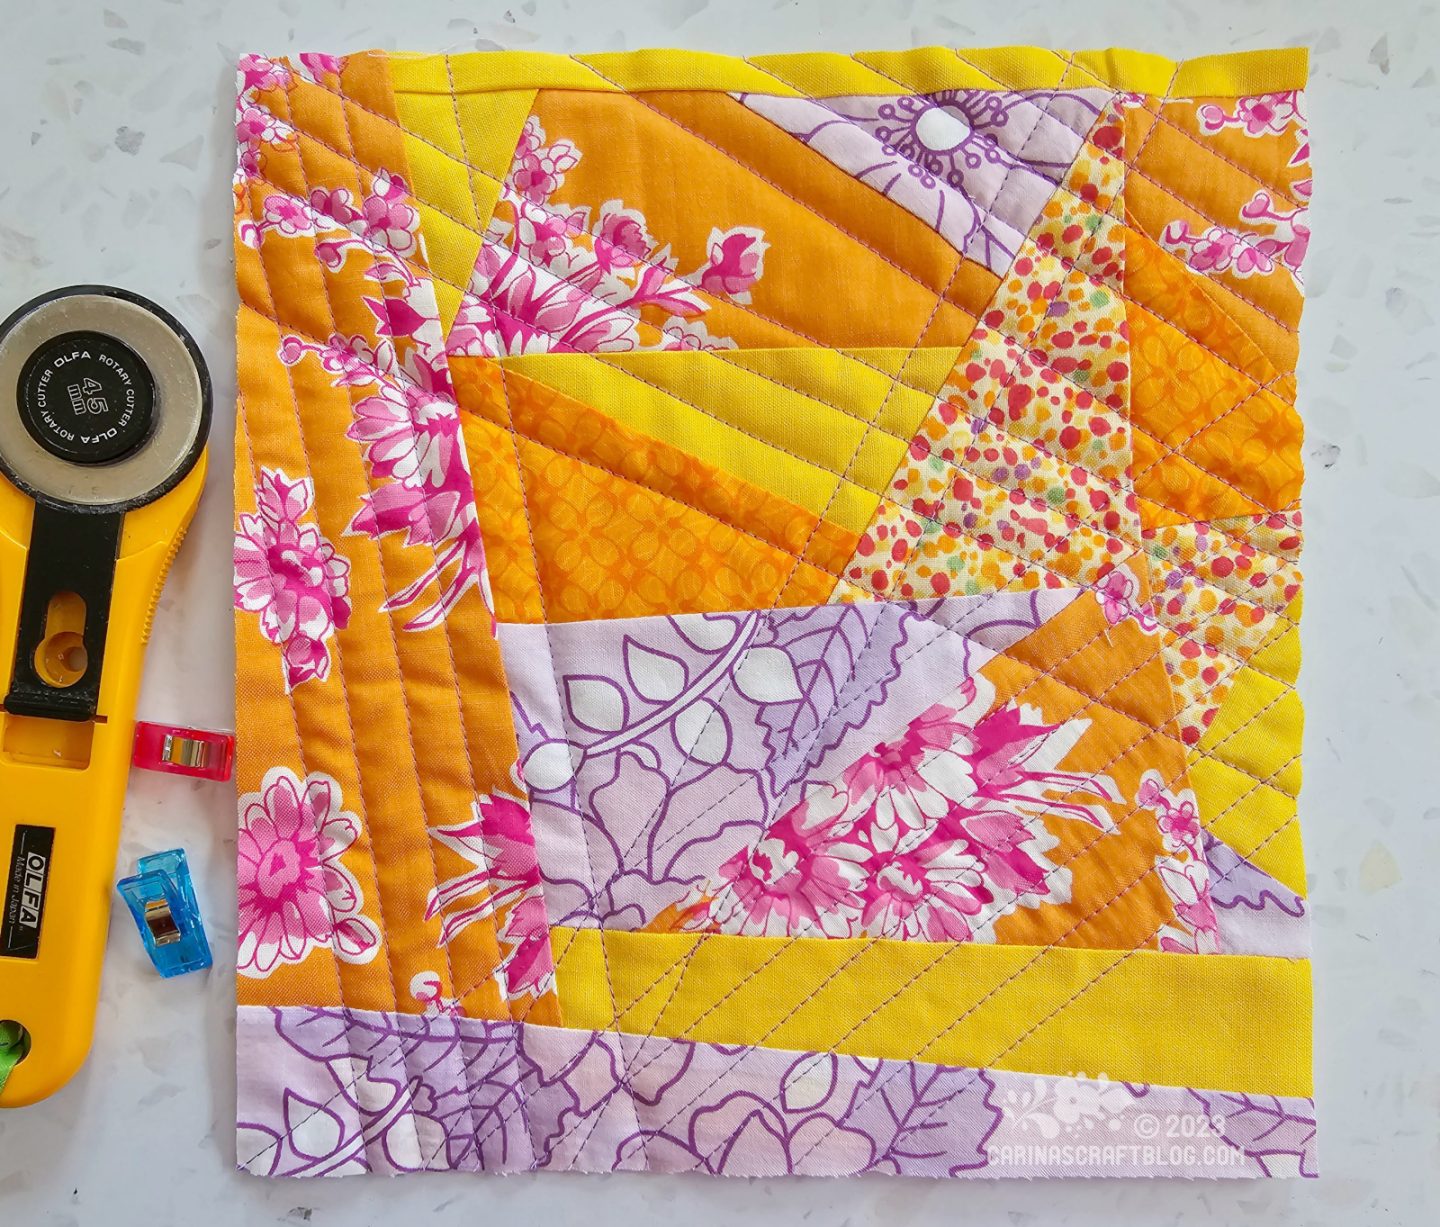 Small square quilt made of differently shaped and sized triangles in yellow, purple and orange colours.